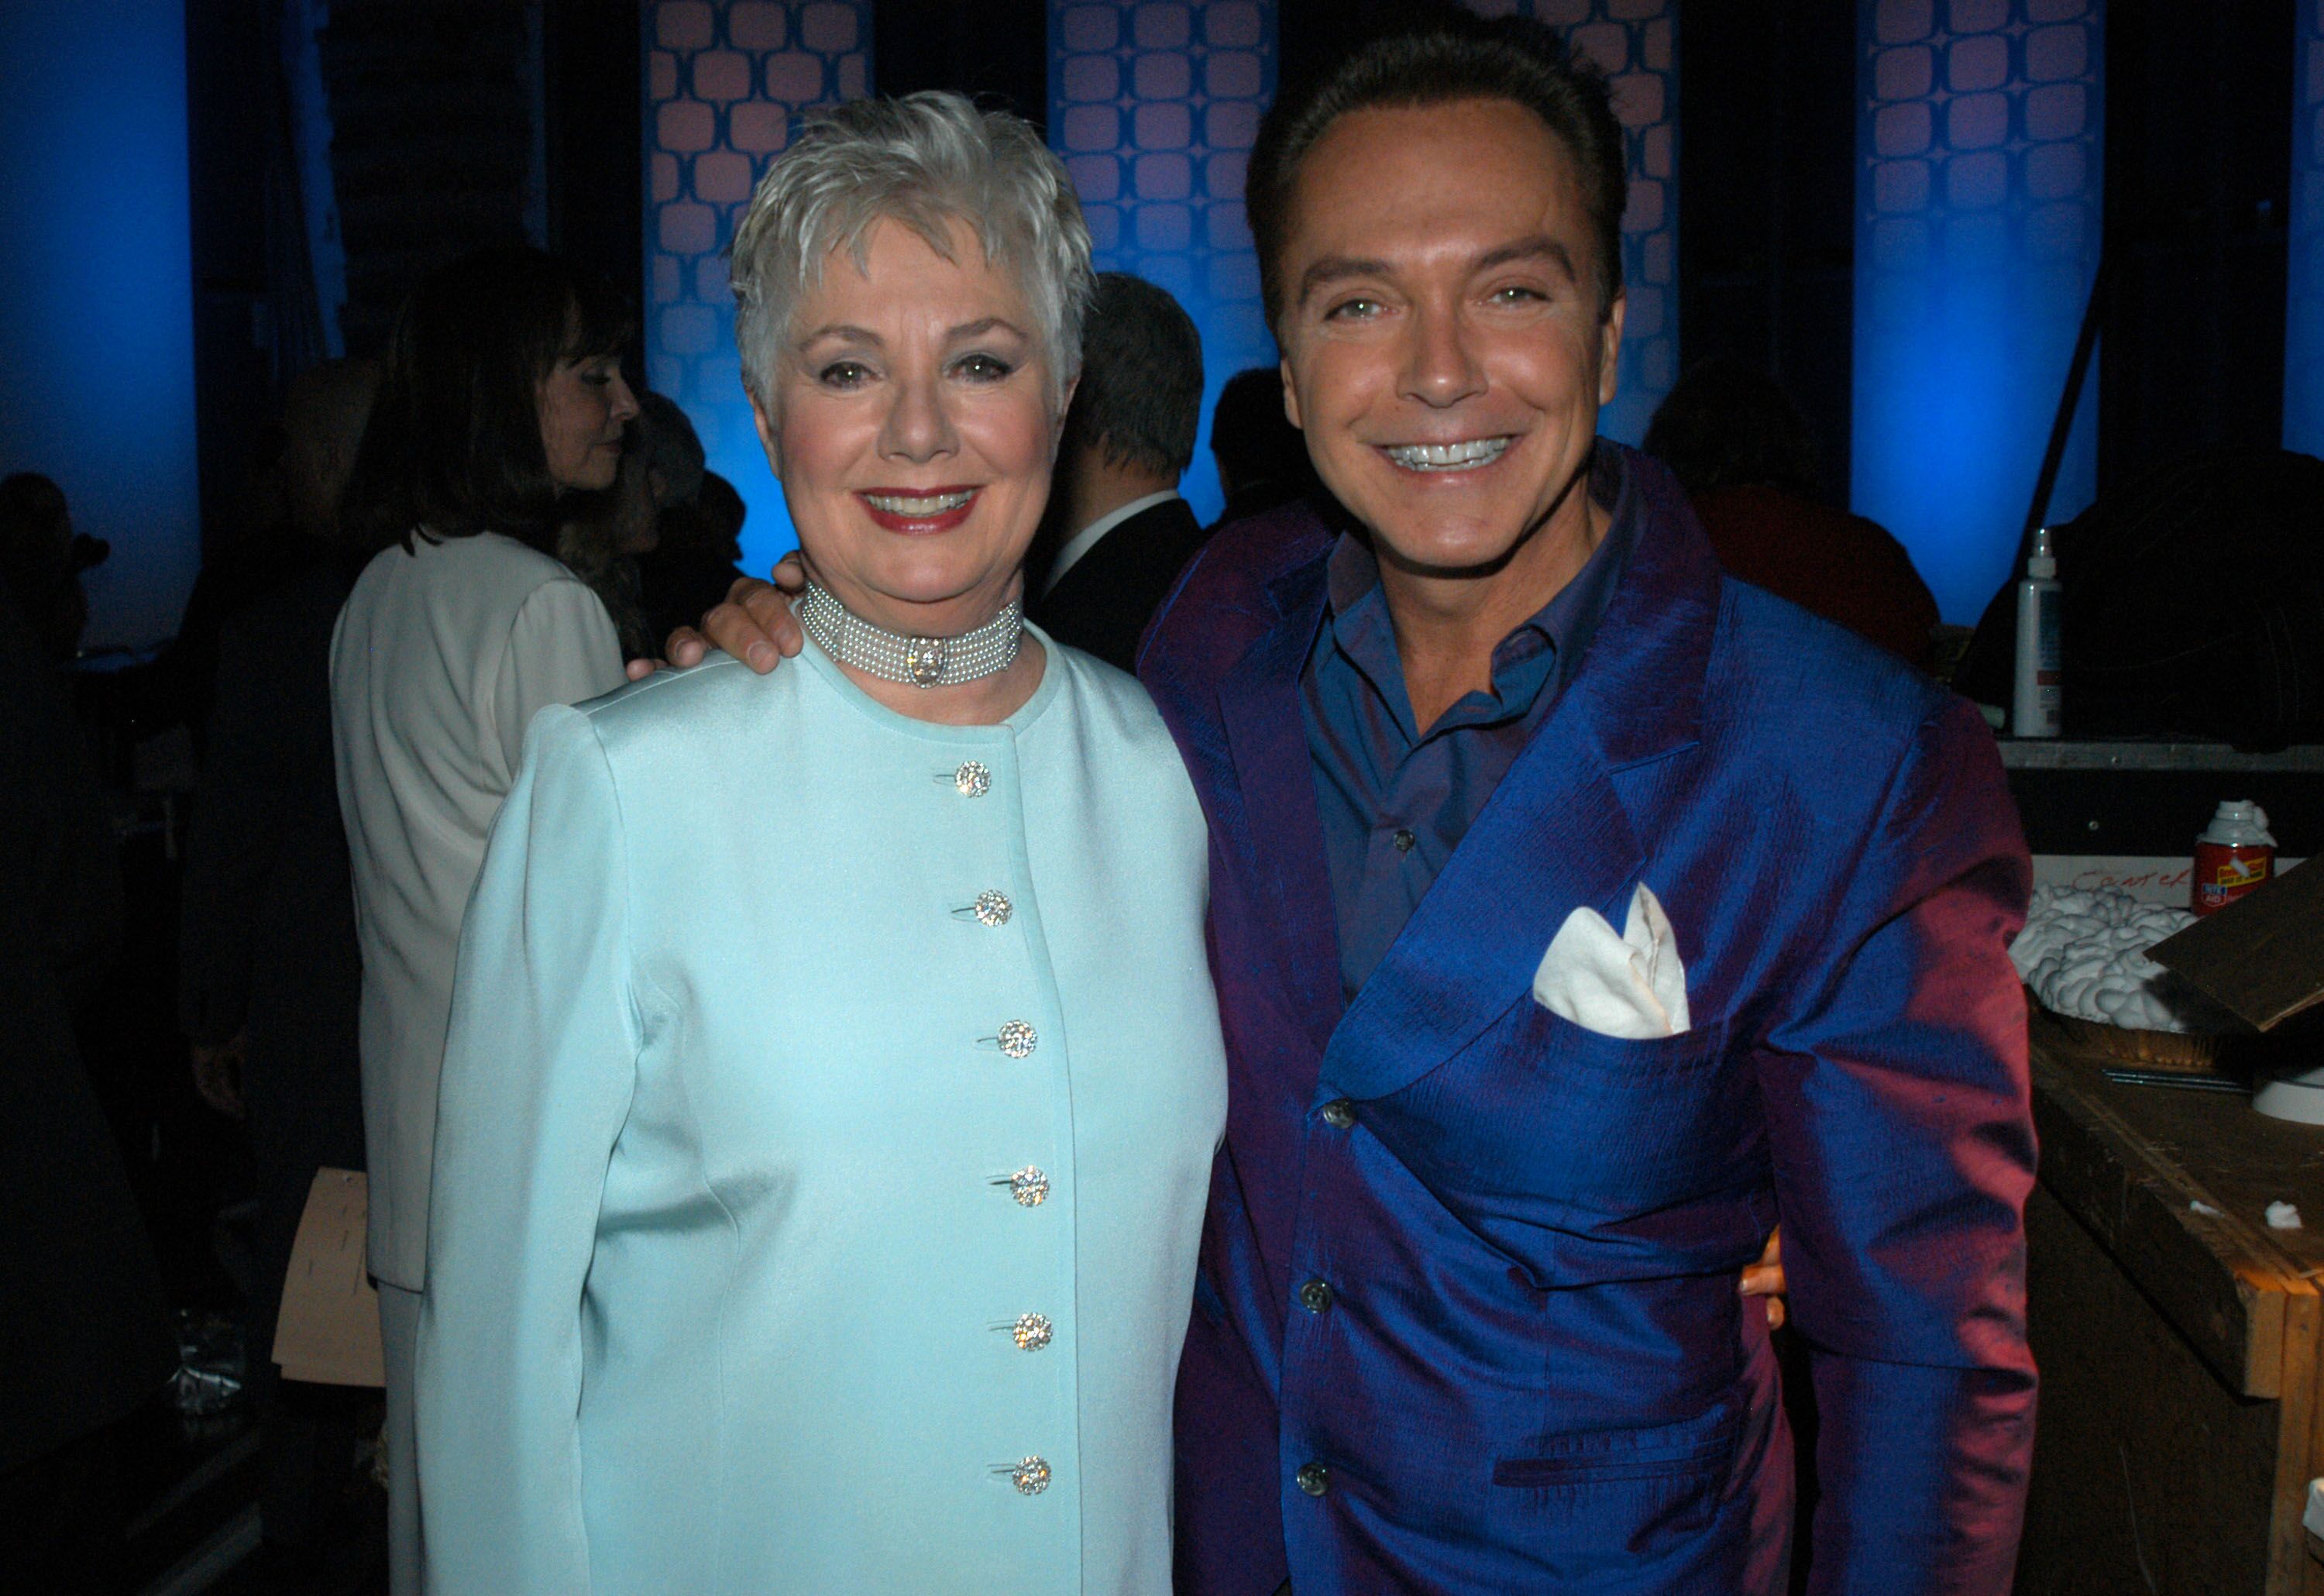 Shirley Jones and David Cassidy during The TV Land Awards at Hollywood Palladium in CA, United States on March 02, 2003 | Photo: Getty Images